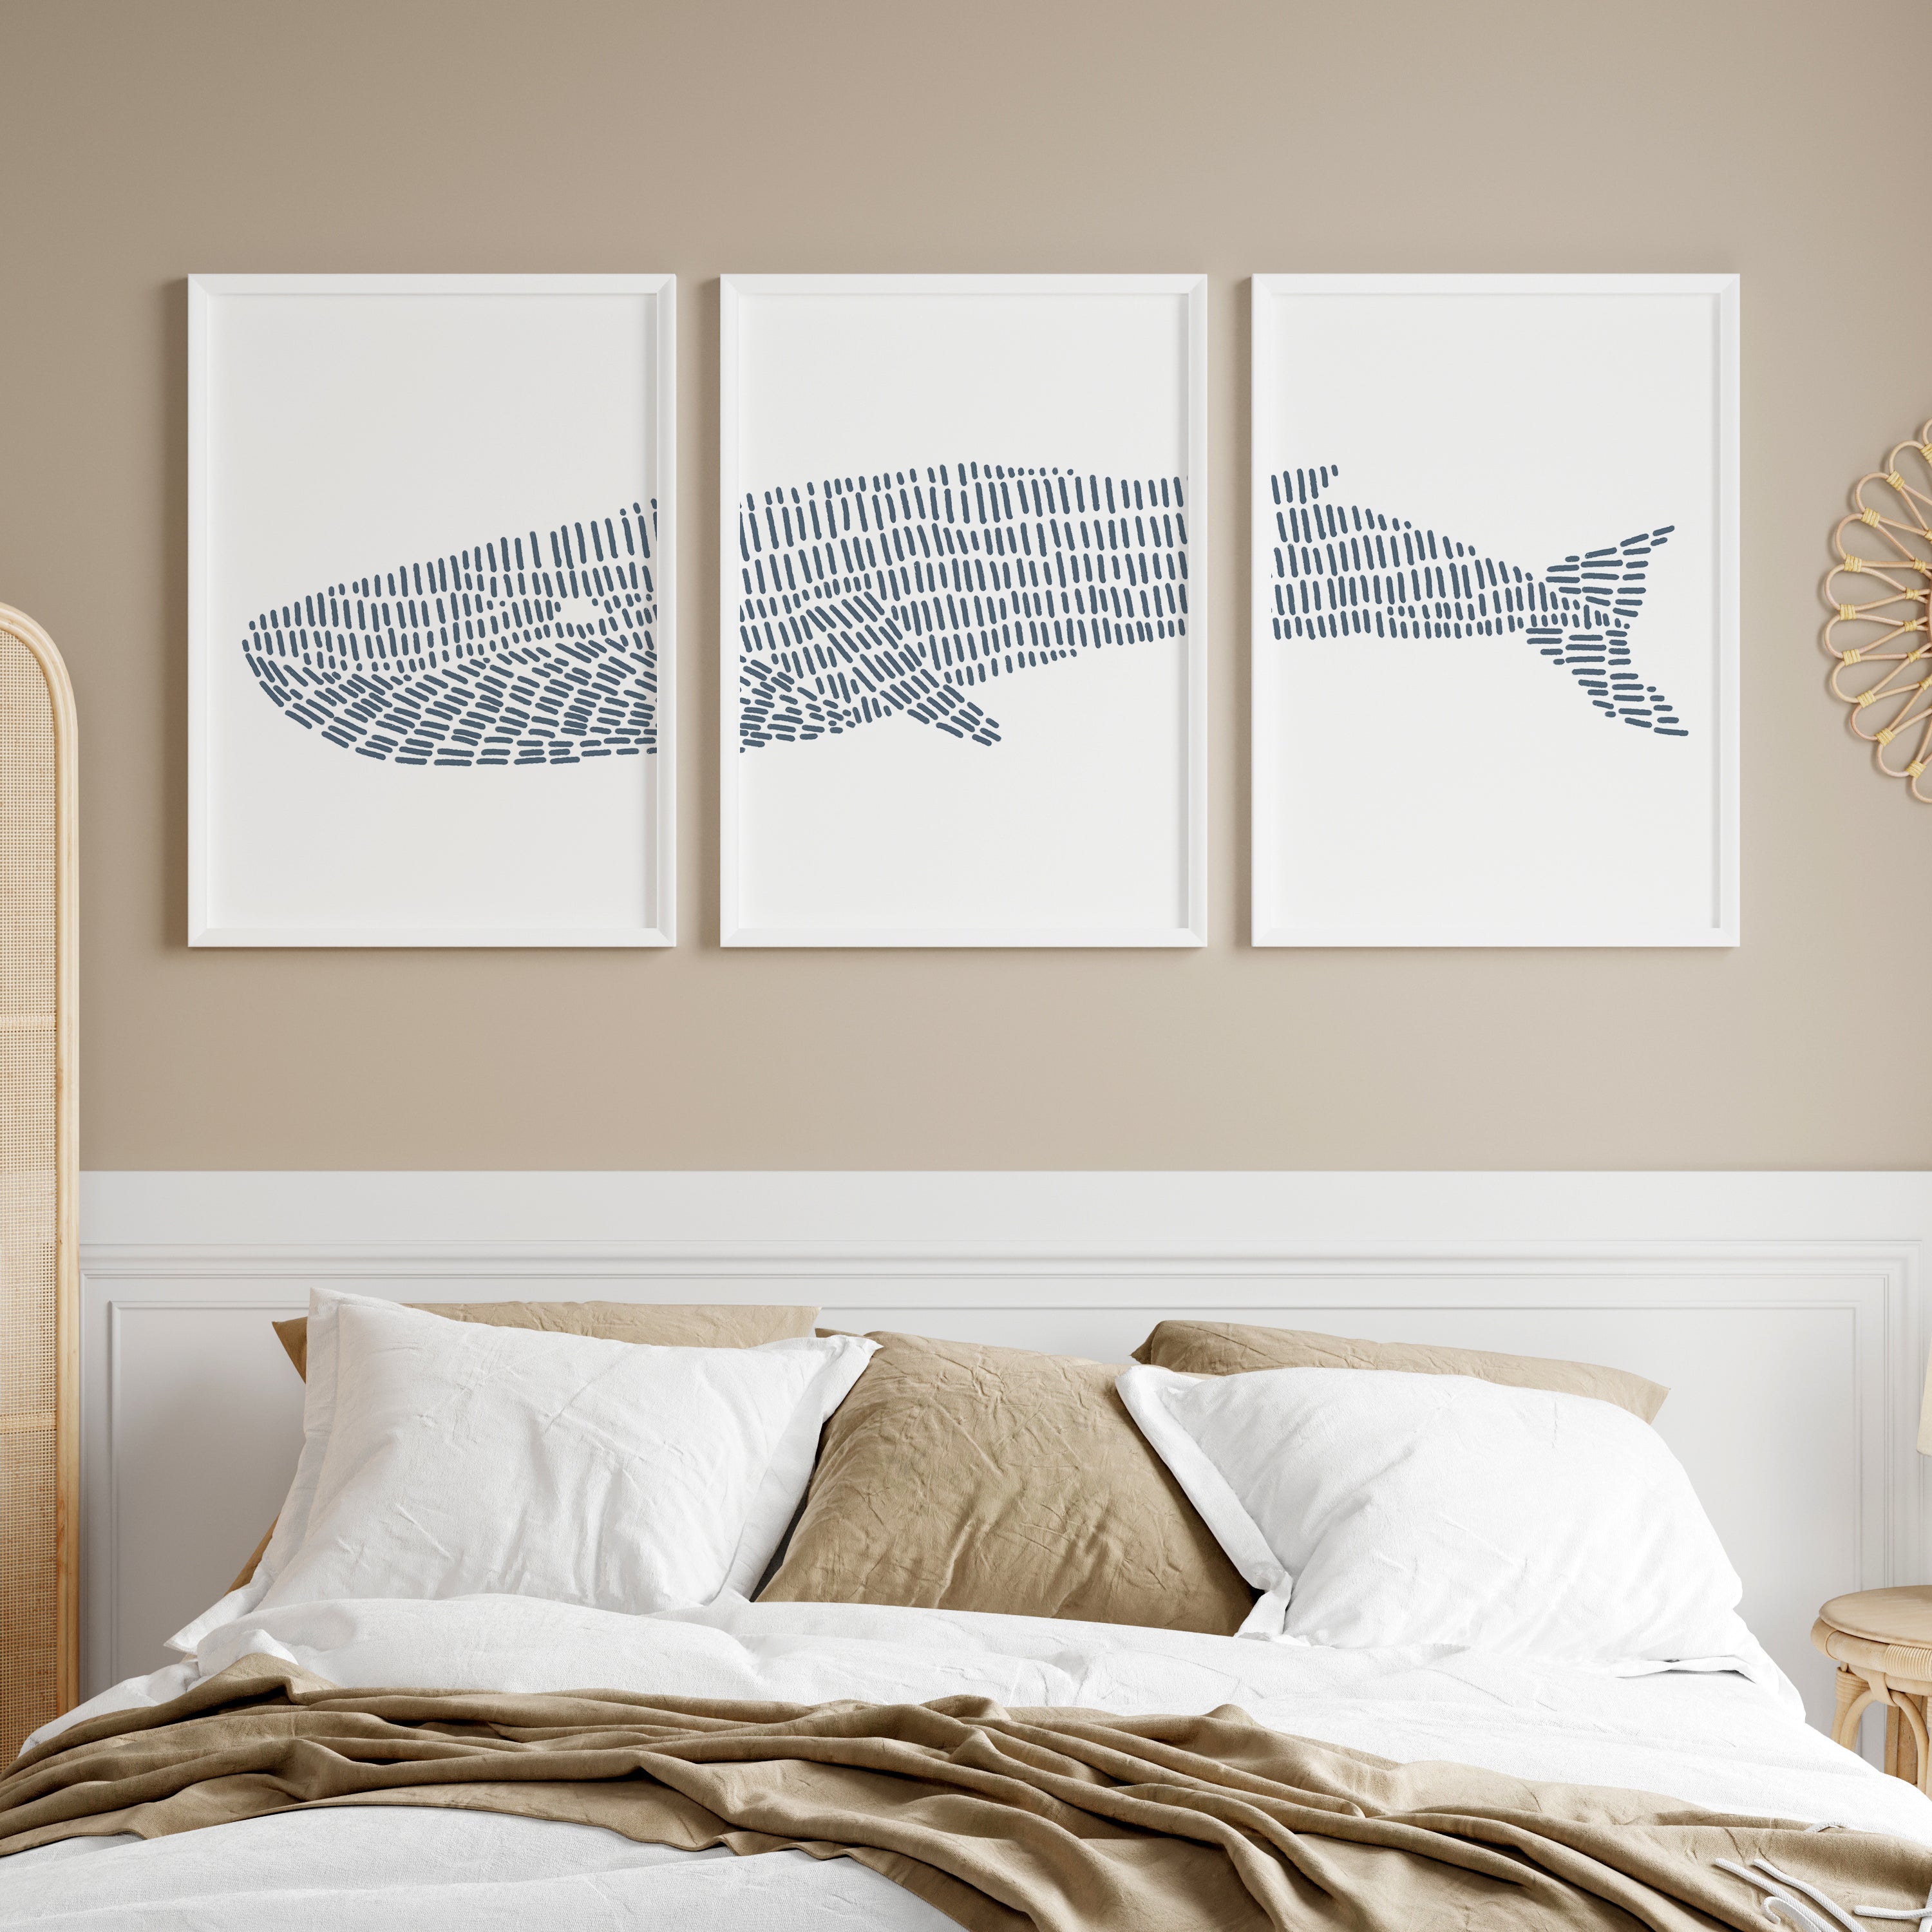 Blue Whale Illustration - Set of 3 - Art Prints or Canvases | Jetty Home